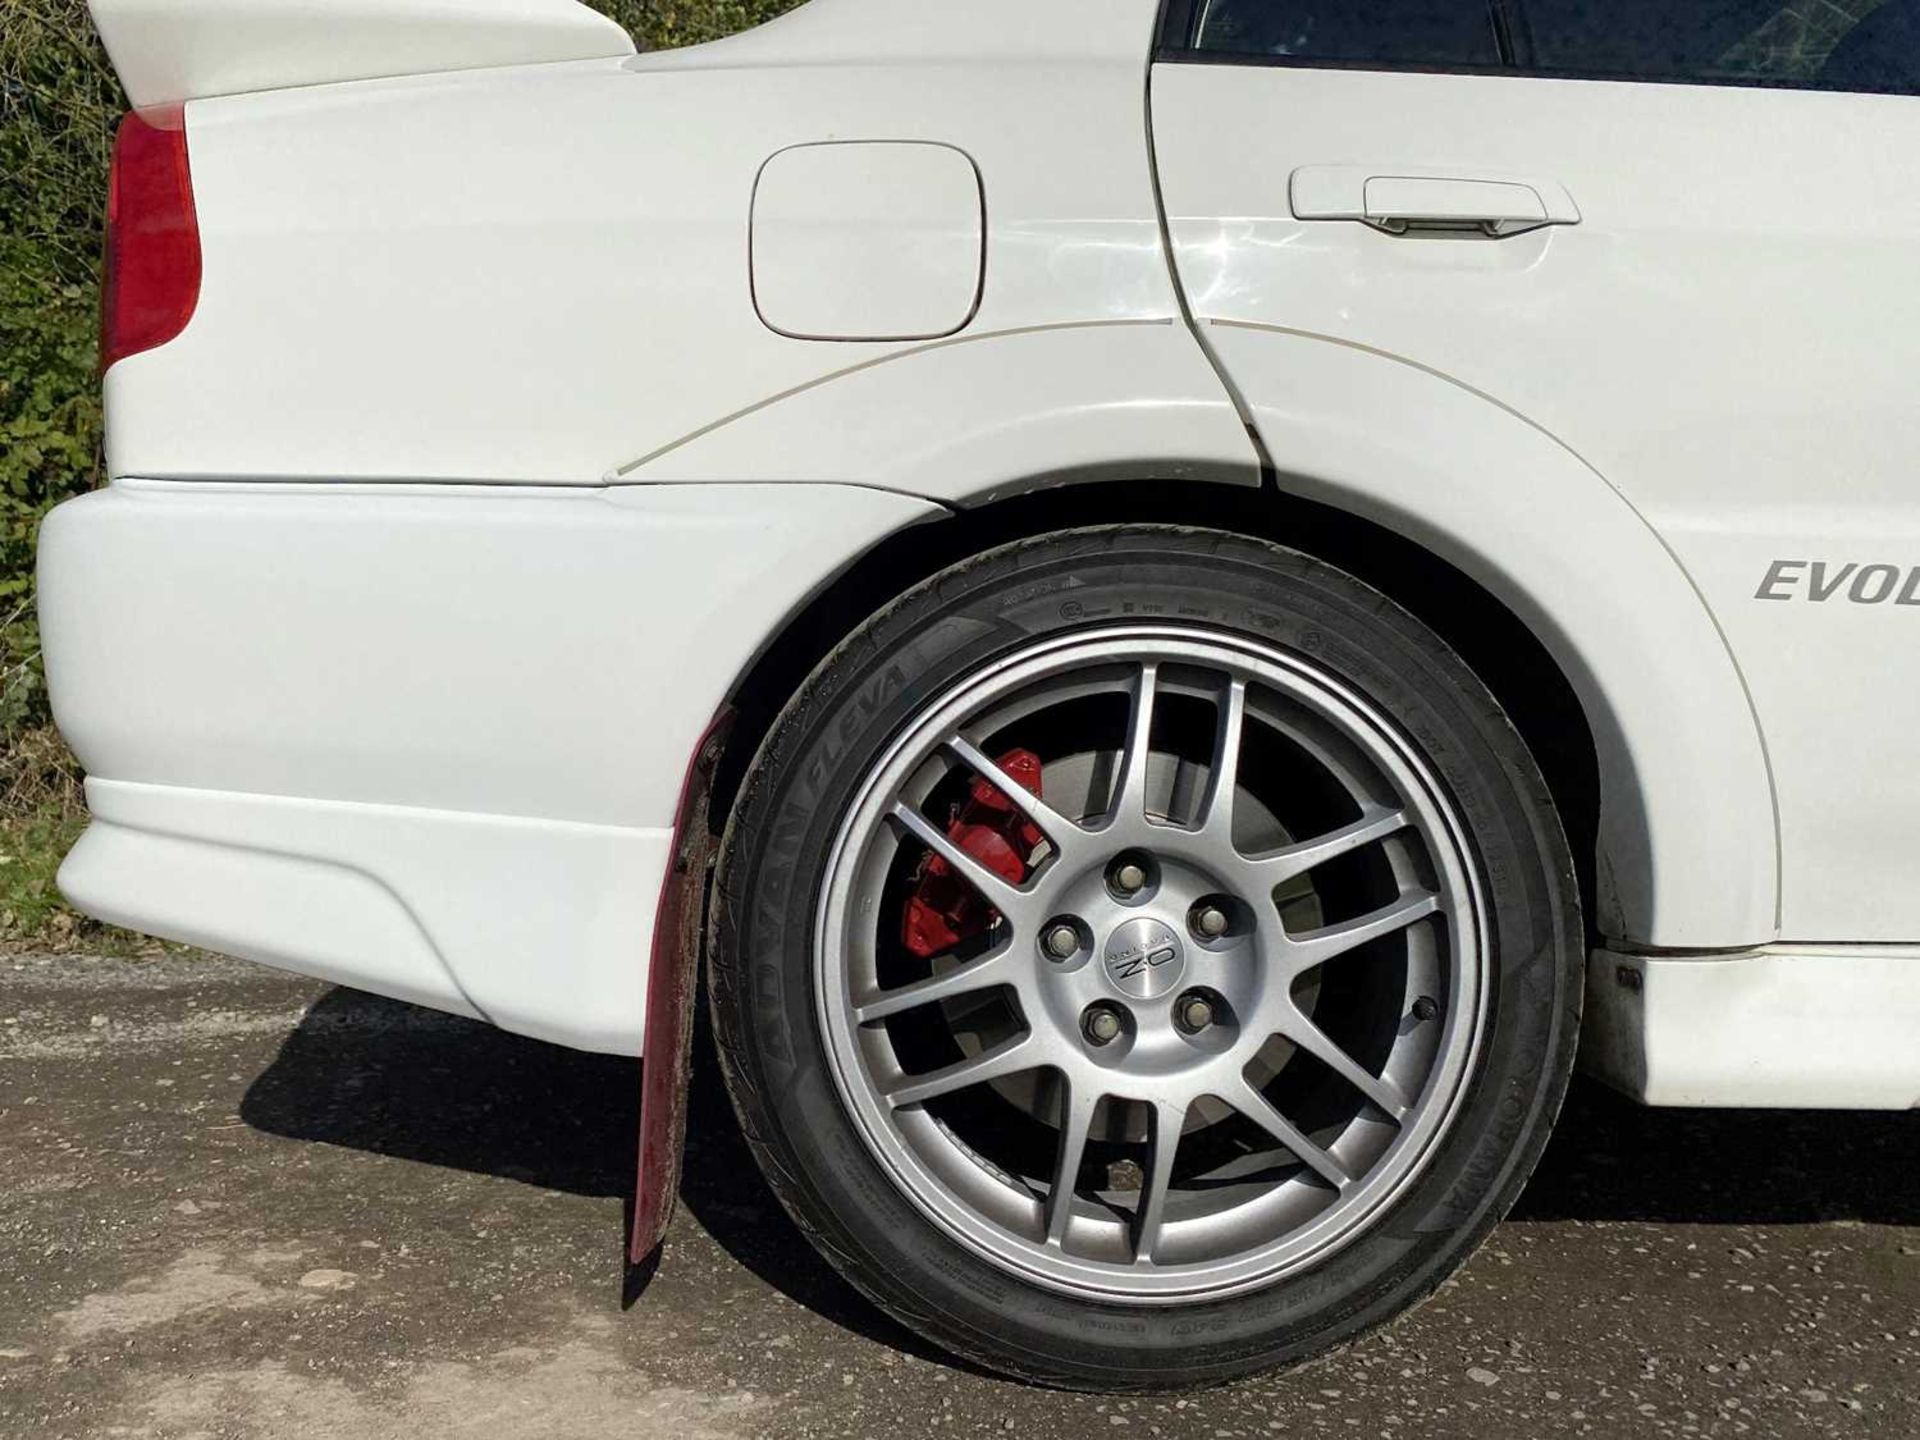 1998 Mitsubishi Lancer Evolution V GSR One UK keeper since being imported two years ago - Image 67 of 100